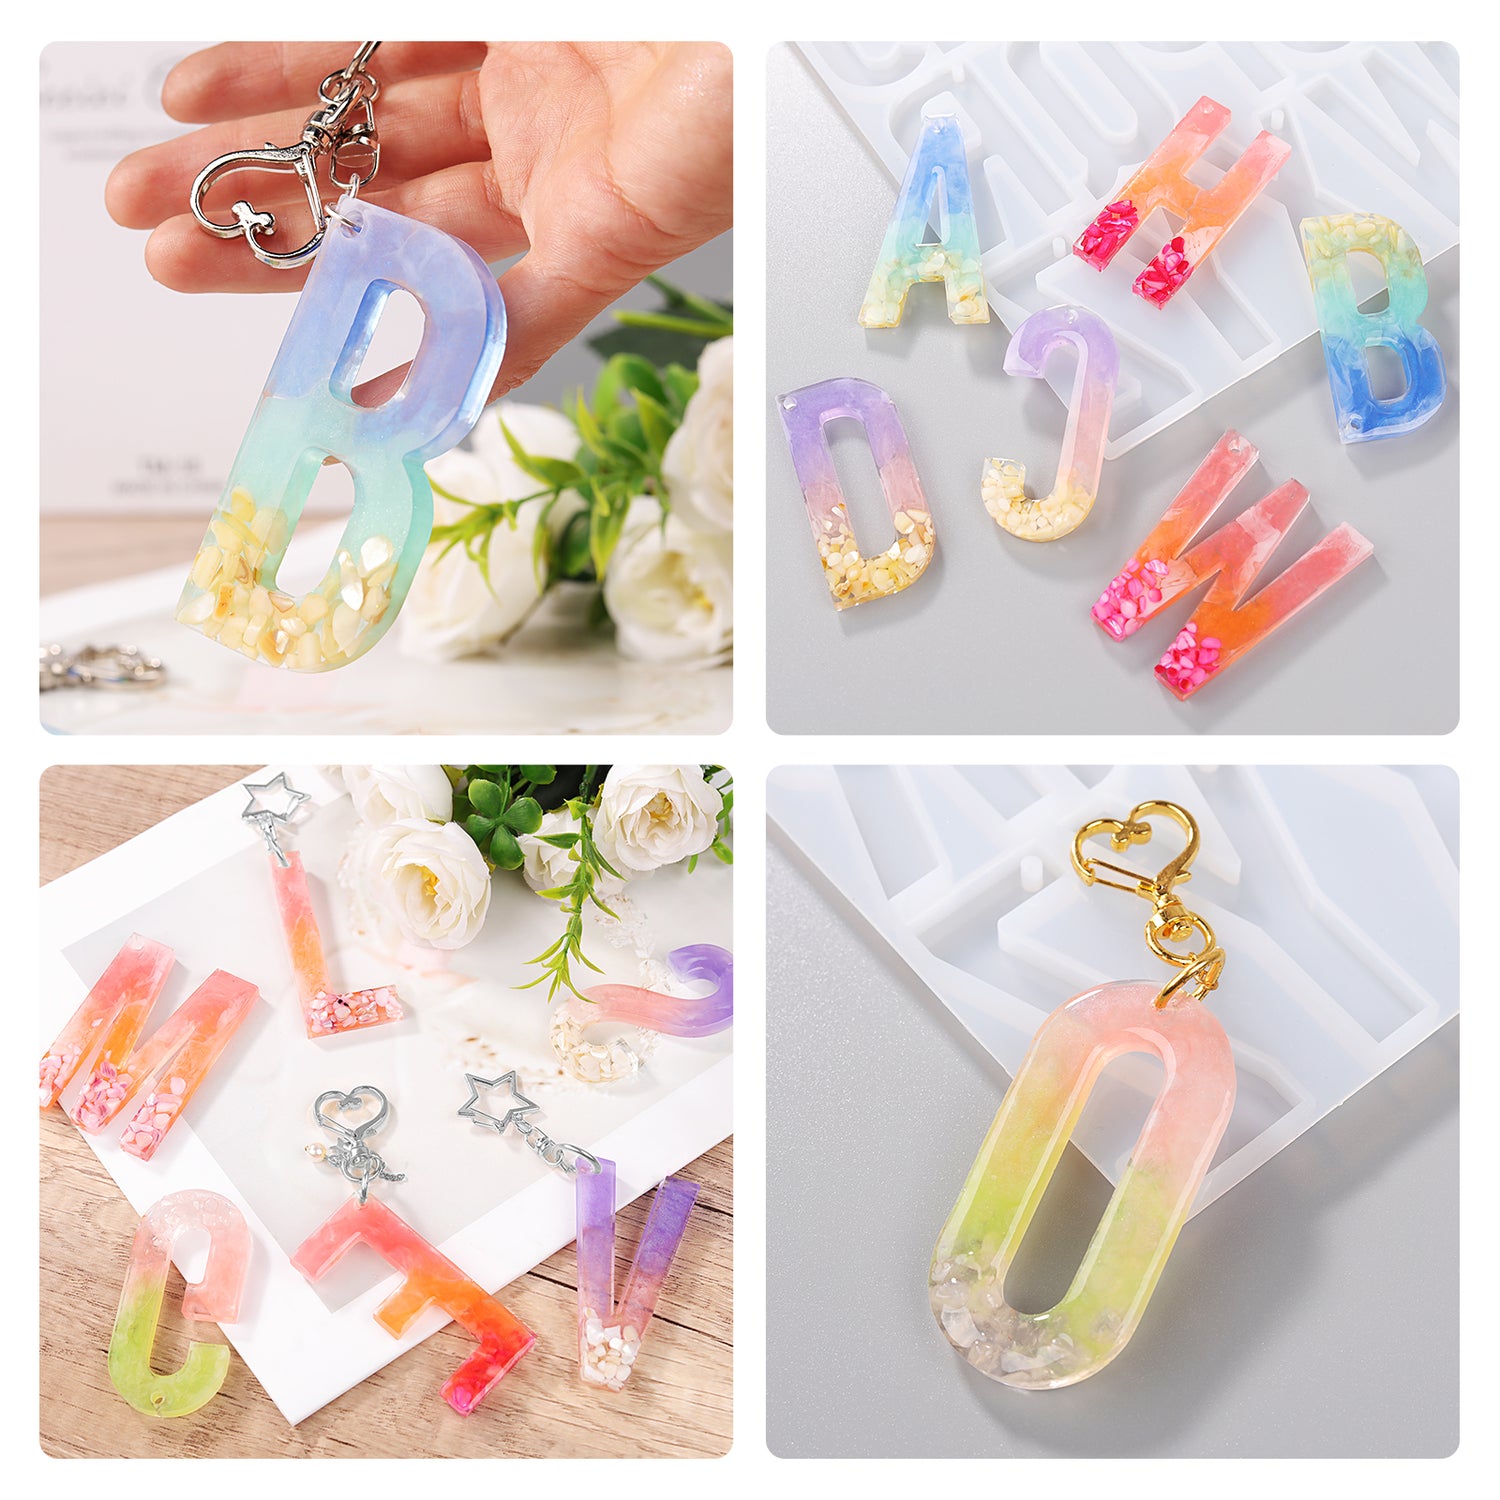 How to make resin keychain for Beginners